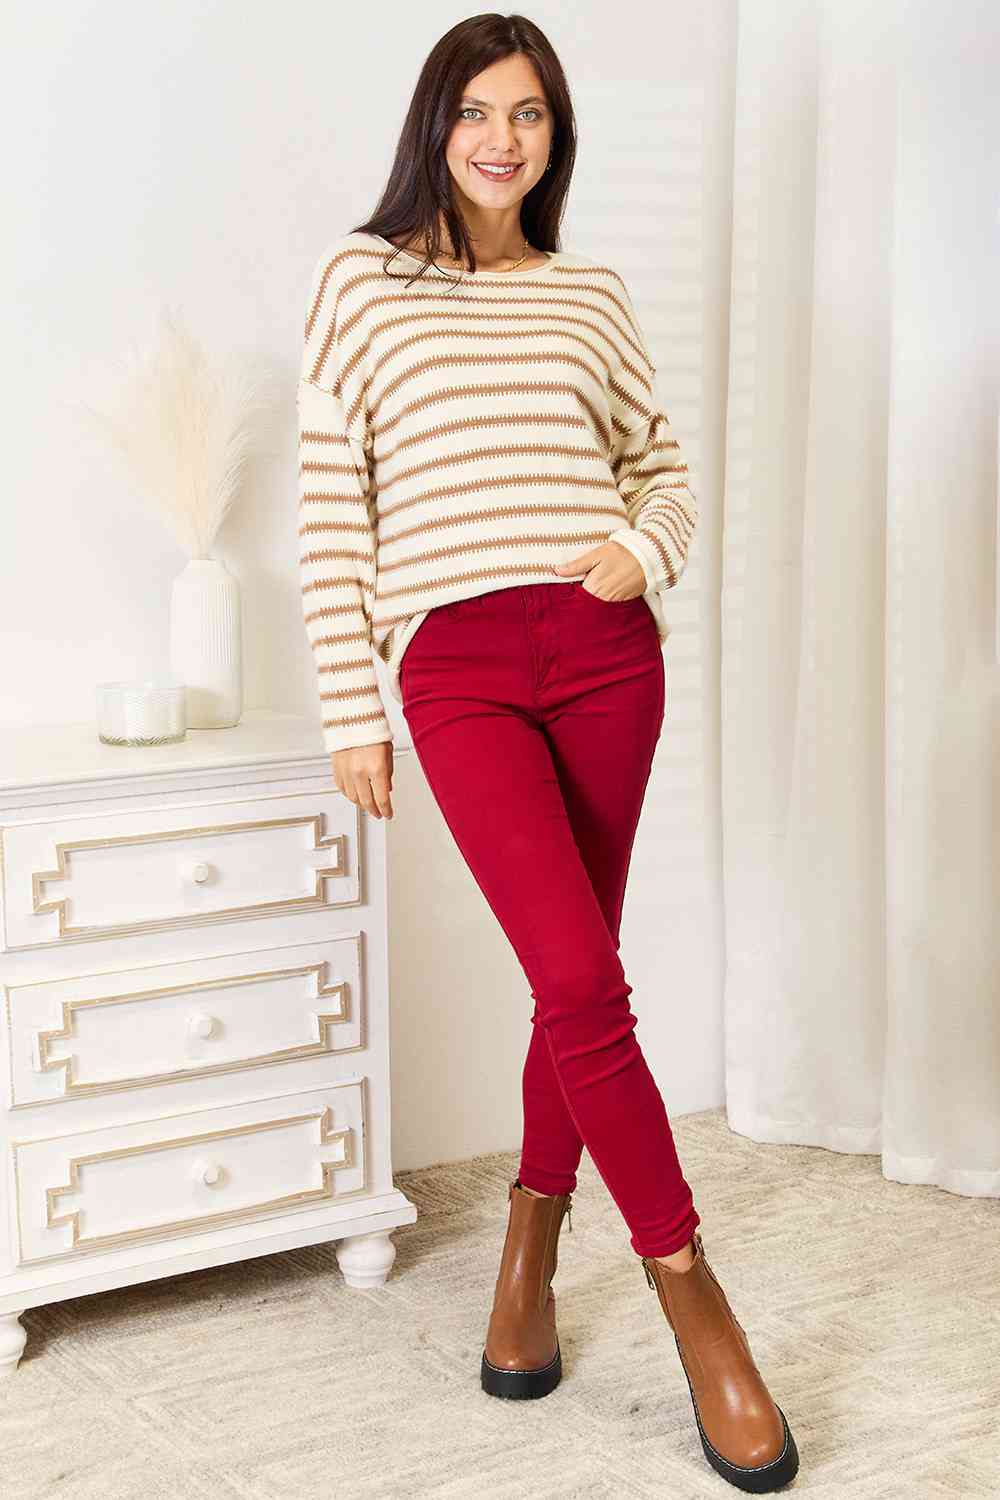 Double Take Striped Boat Neck Sweater - Pullover Sweaters - FITGGINS